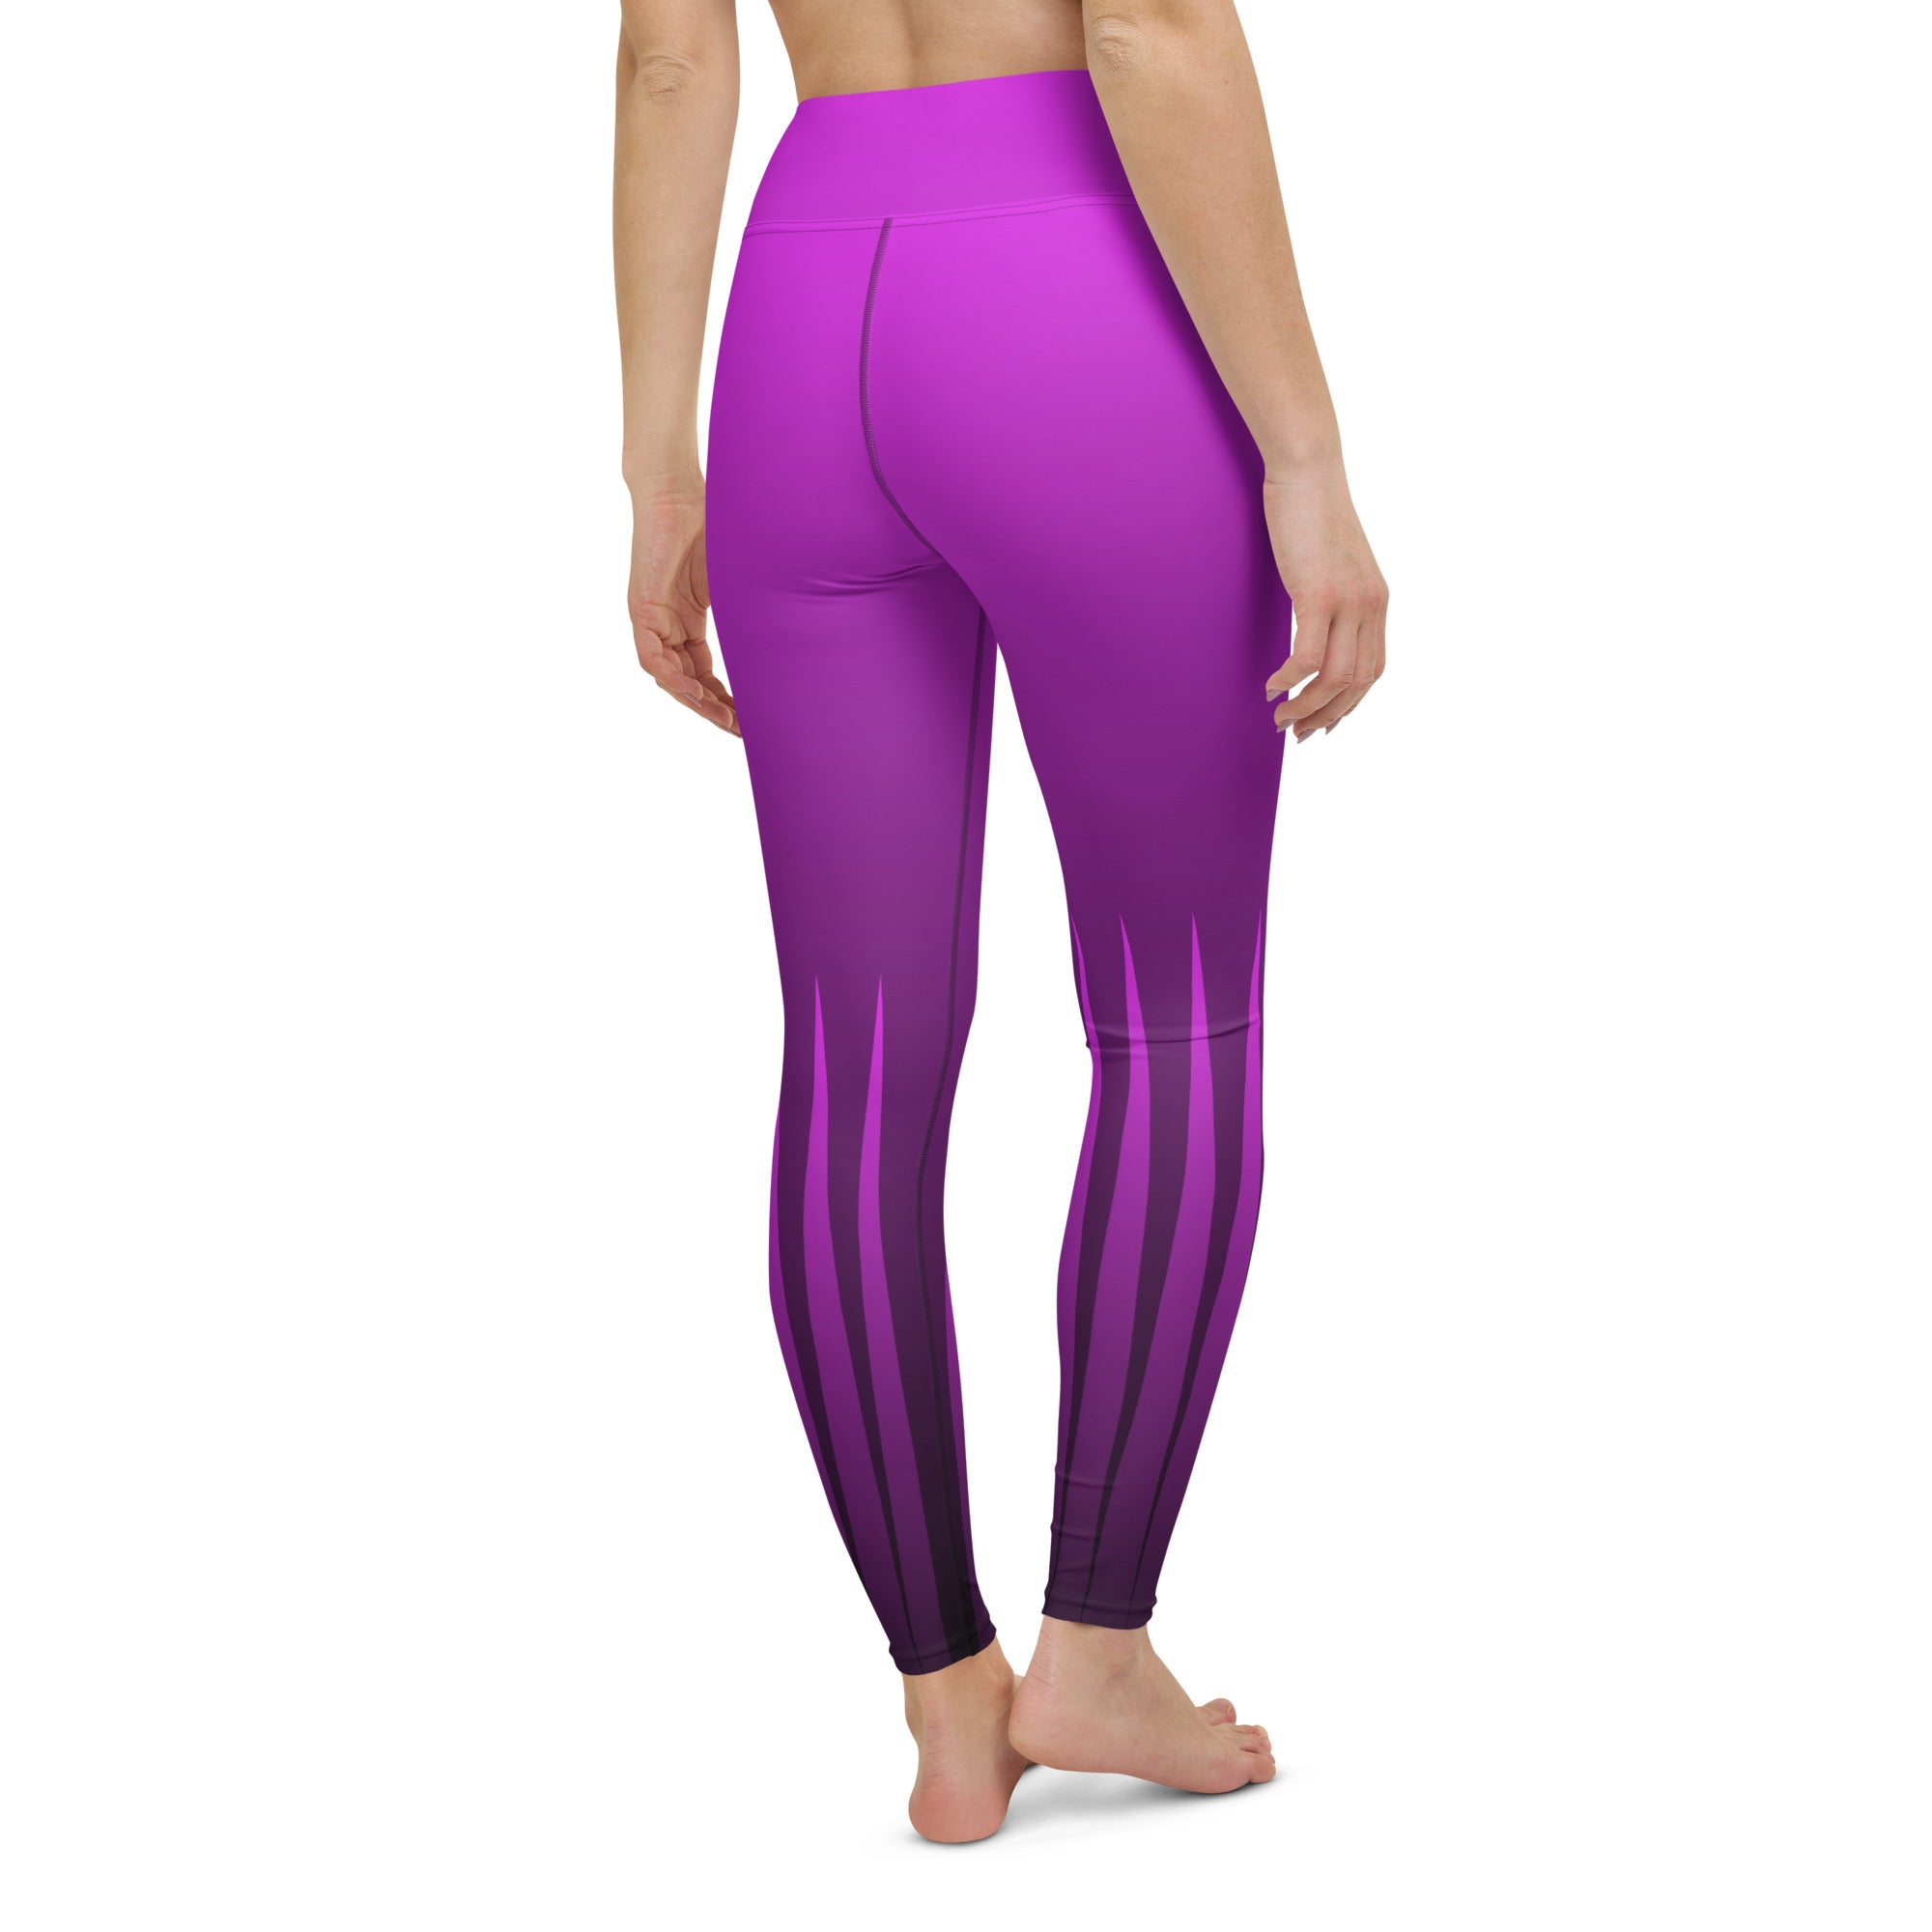 Let the soothing colors of the ocean inspire your practice with these beautifully designed Serene Ocean Leggings.